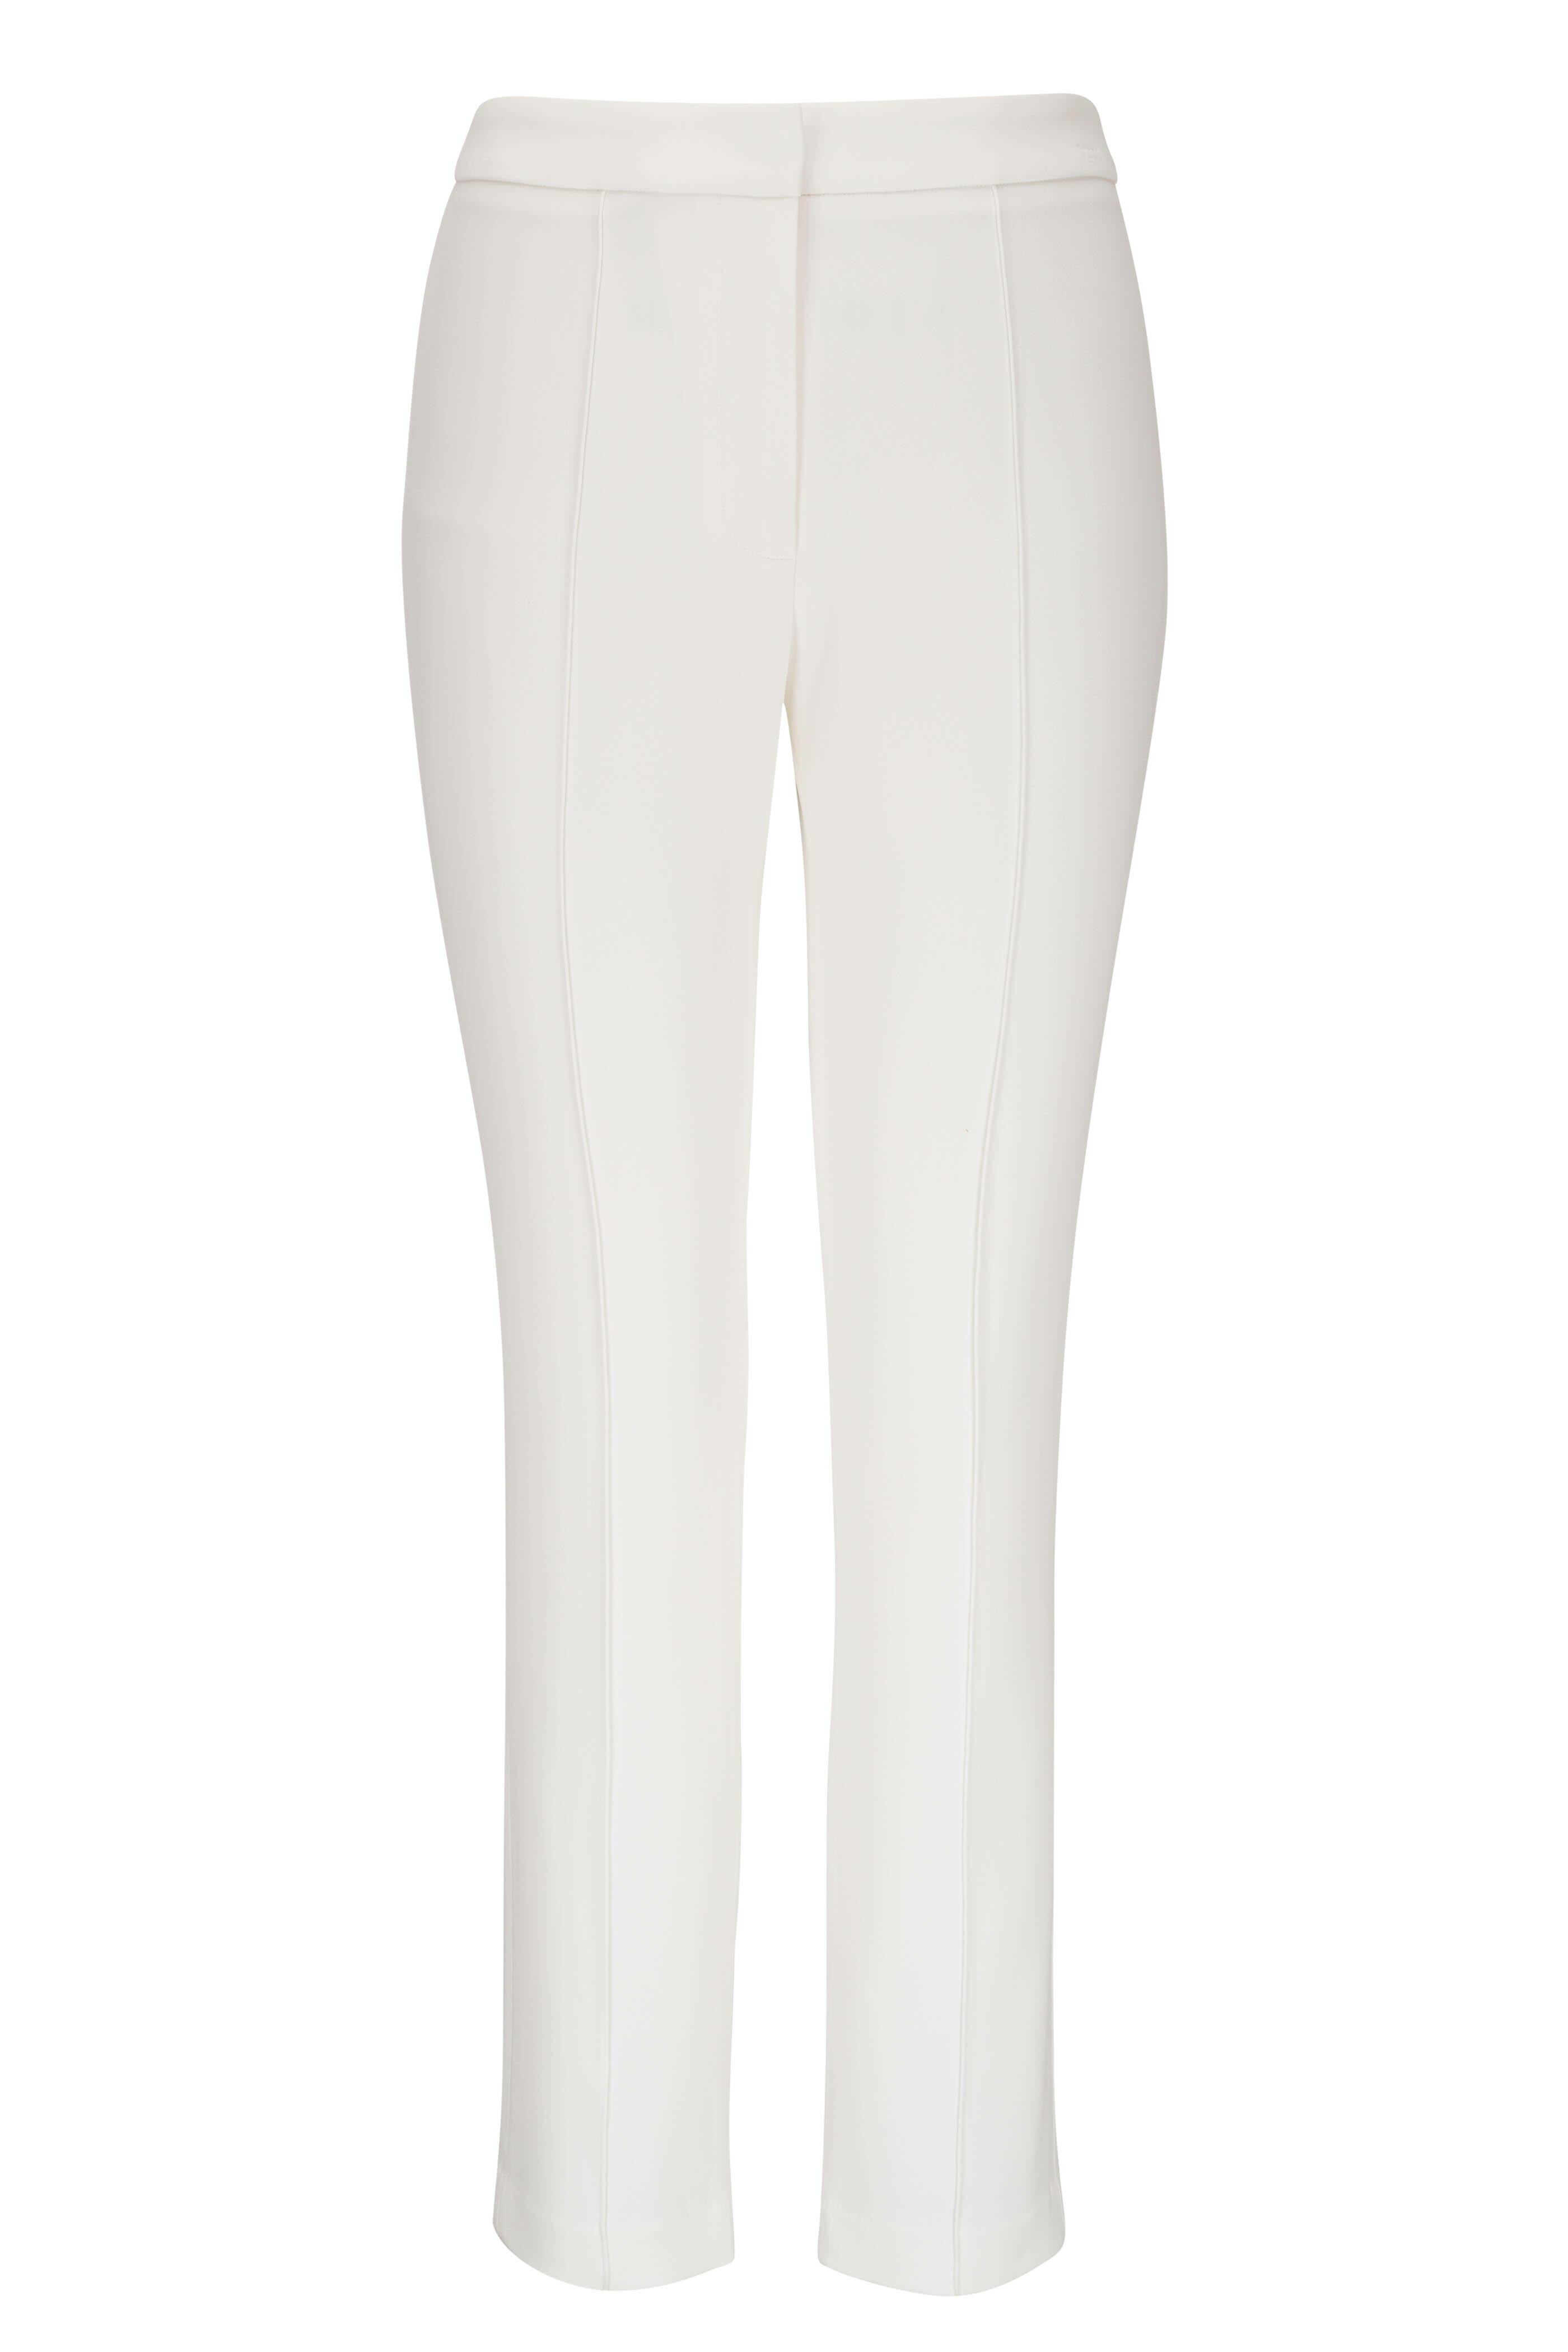 Adam Lippes - Ivory Stretch Cady Skinny Pant | Mitchell Stores